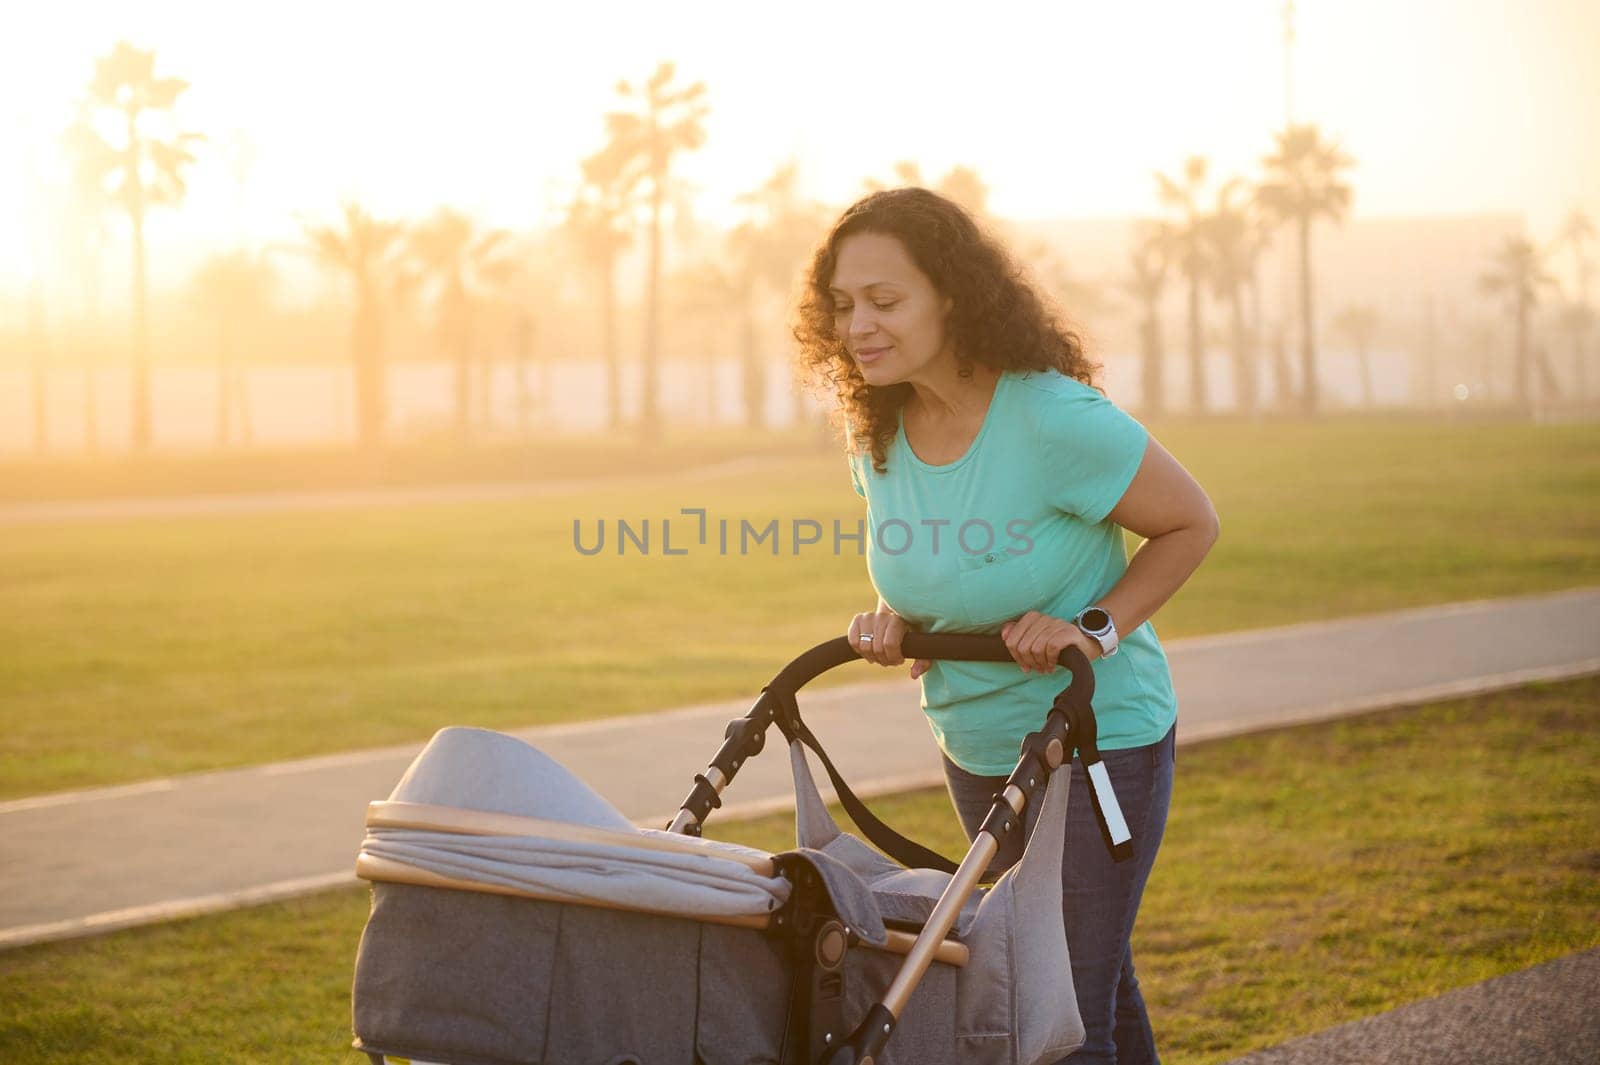 Mum walking on city street at sunset. Multi ethnic cheerful young adult woman pushing her newborn baby sleeping in a pram, during daily outdoors walking. Family concept and healthy lifestyle